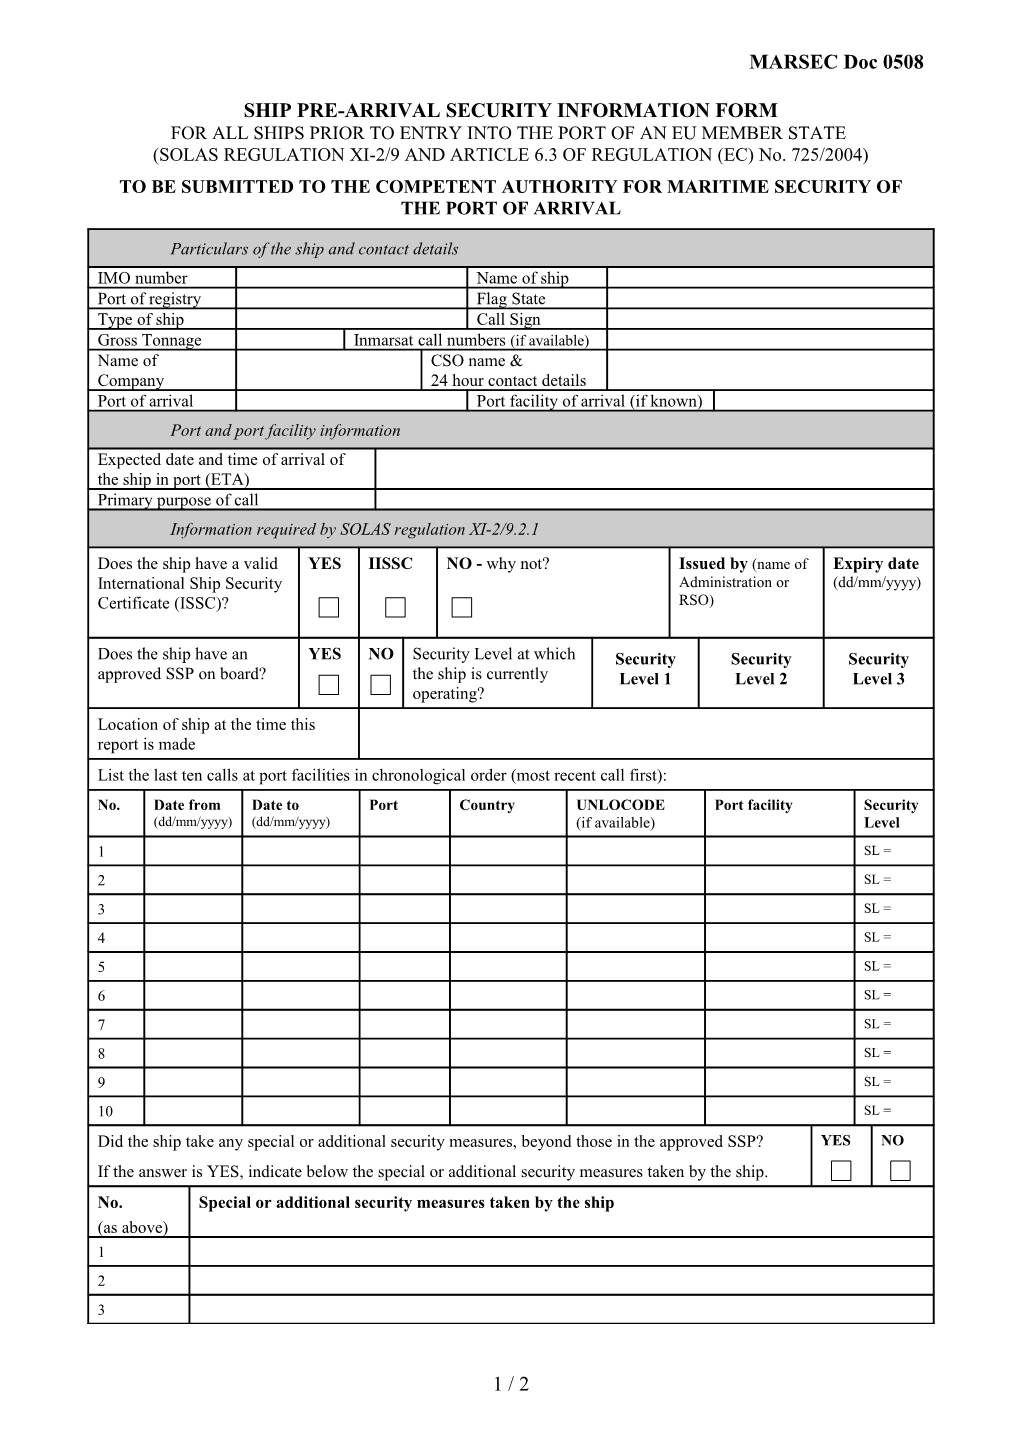 Ship Pre-Arrival Security Information Form